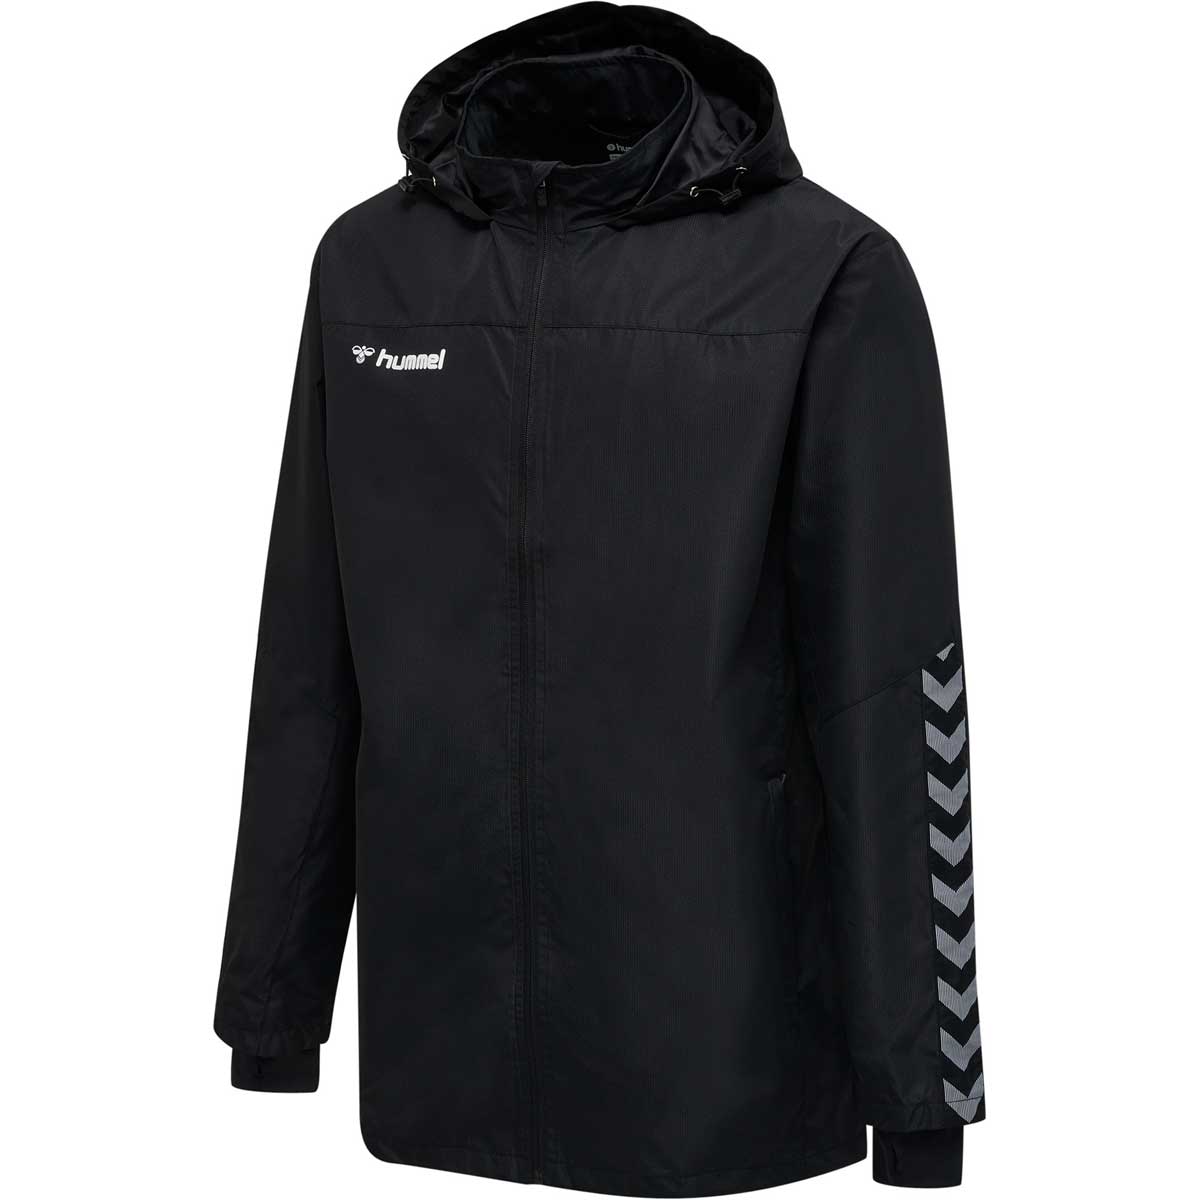 Hmlauthentic All-weather-jacket 